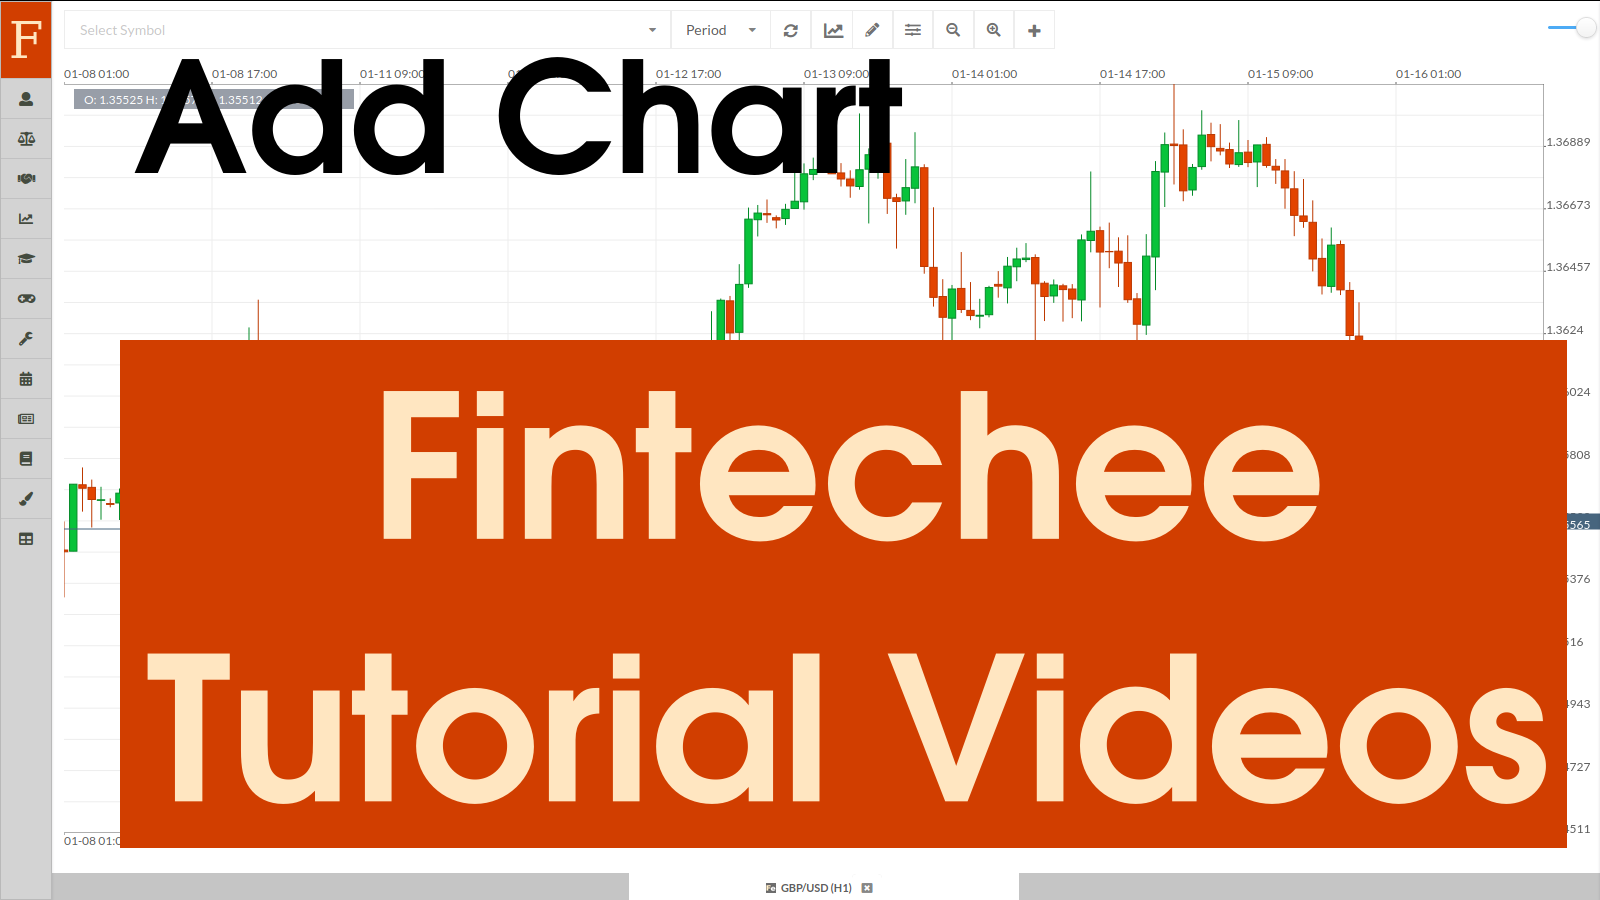 This tutorial video talks about how to add a chart into the window via Fintechee WEB Trader